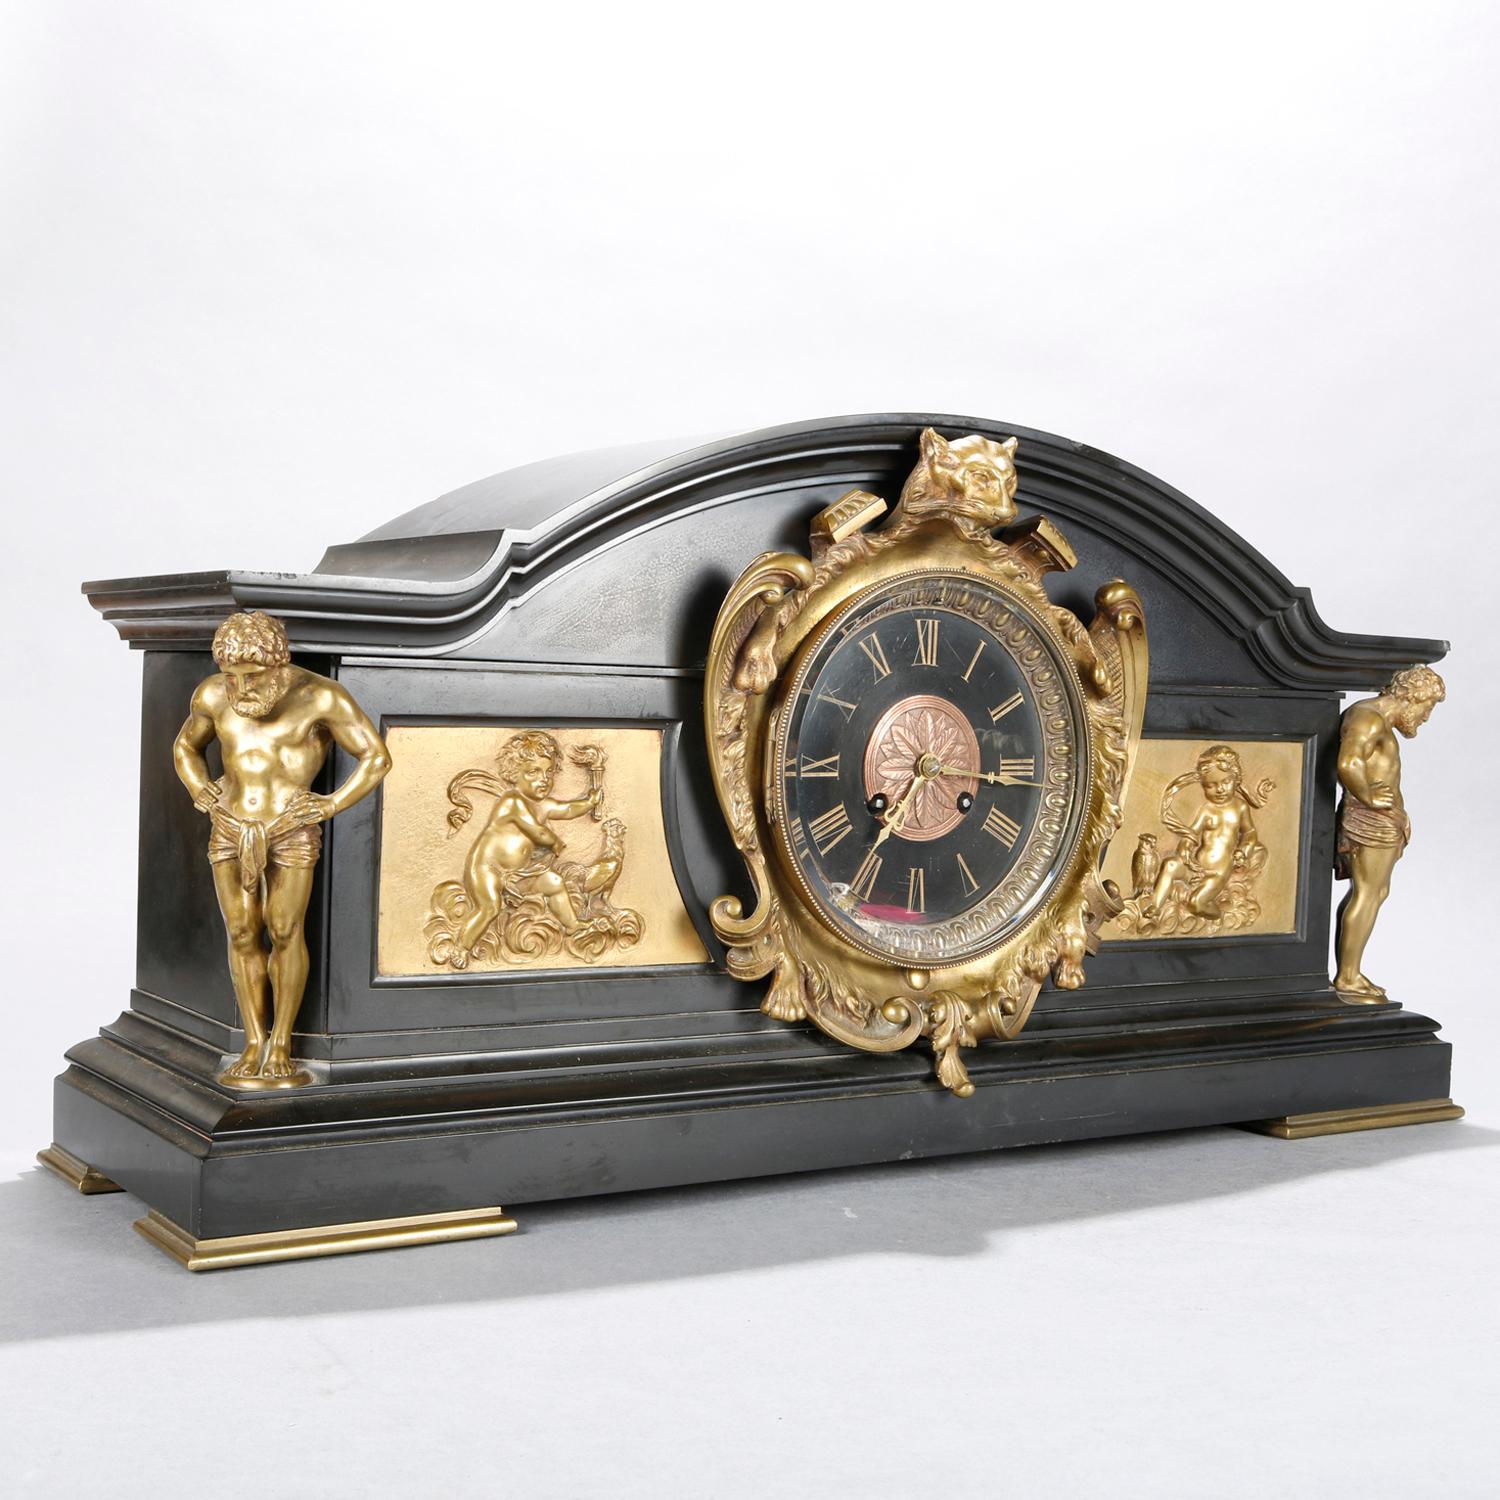 An antique and oversized Neoclassical into Baroque mantel clock offers domed slate case in architectural form with cast bronze Atlas caryatid supports, central face having Roman Numerals and scrolled foliate surround with lion head finial and